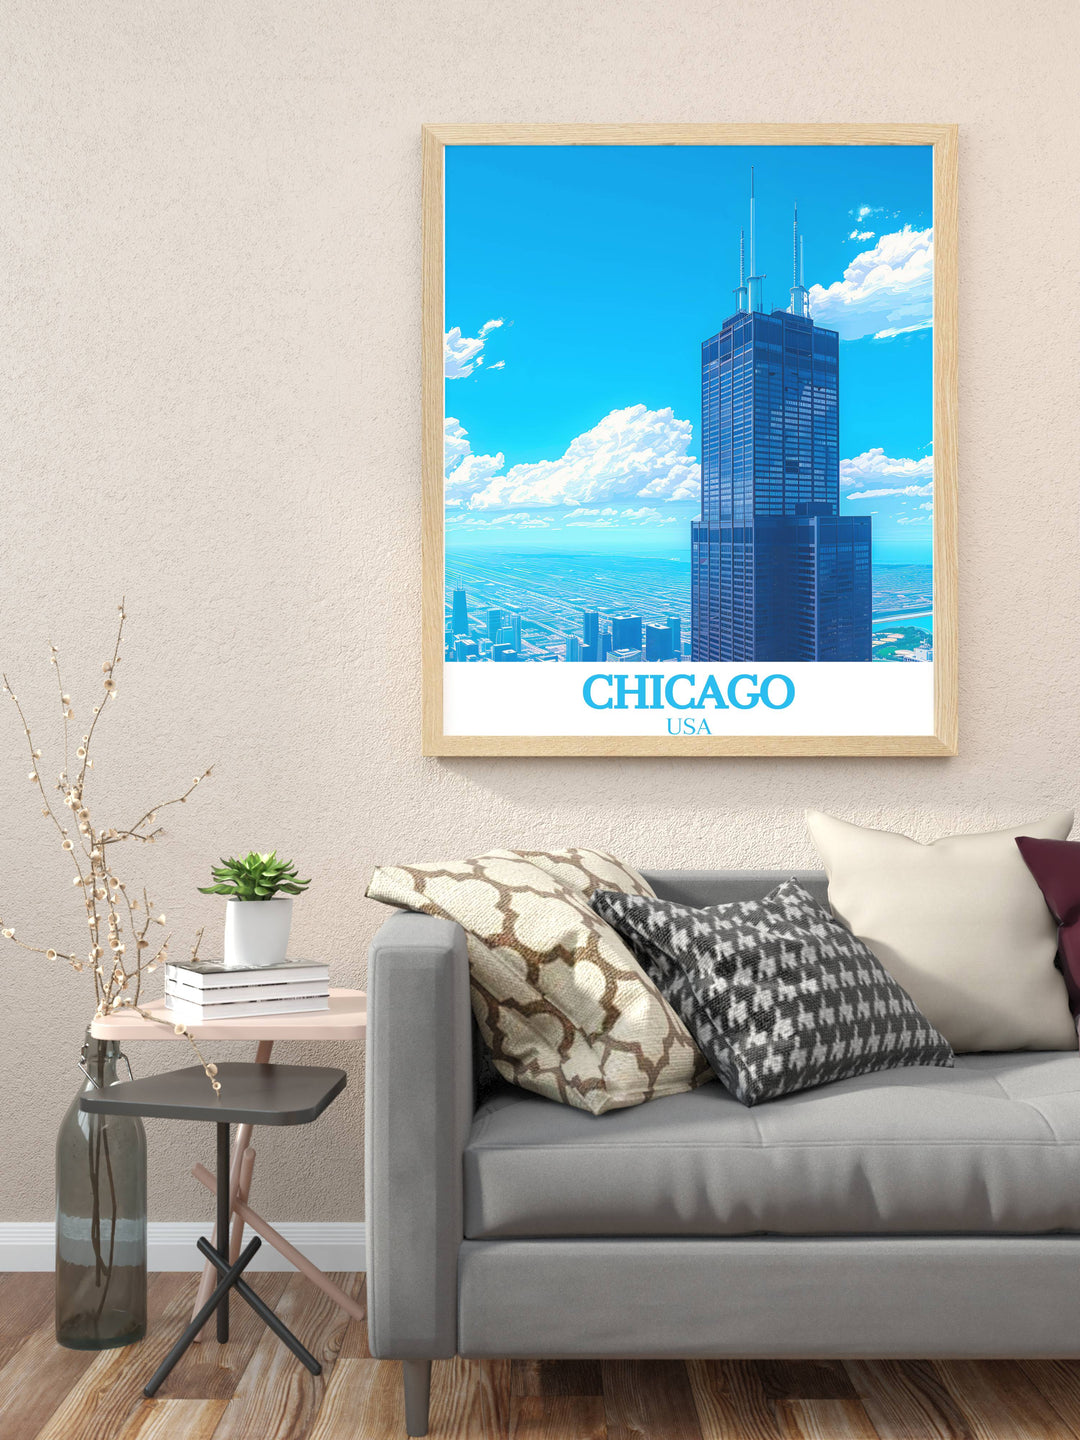 The Willis Tower Formerly Sears Tower poster capturing the imposing presence and intricate design of Chicagos famous skyscraper. An excellent piece for enhancing home decor or as a unique travel gift for loved ones.